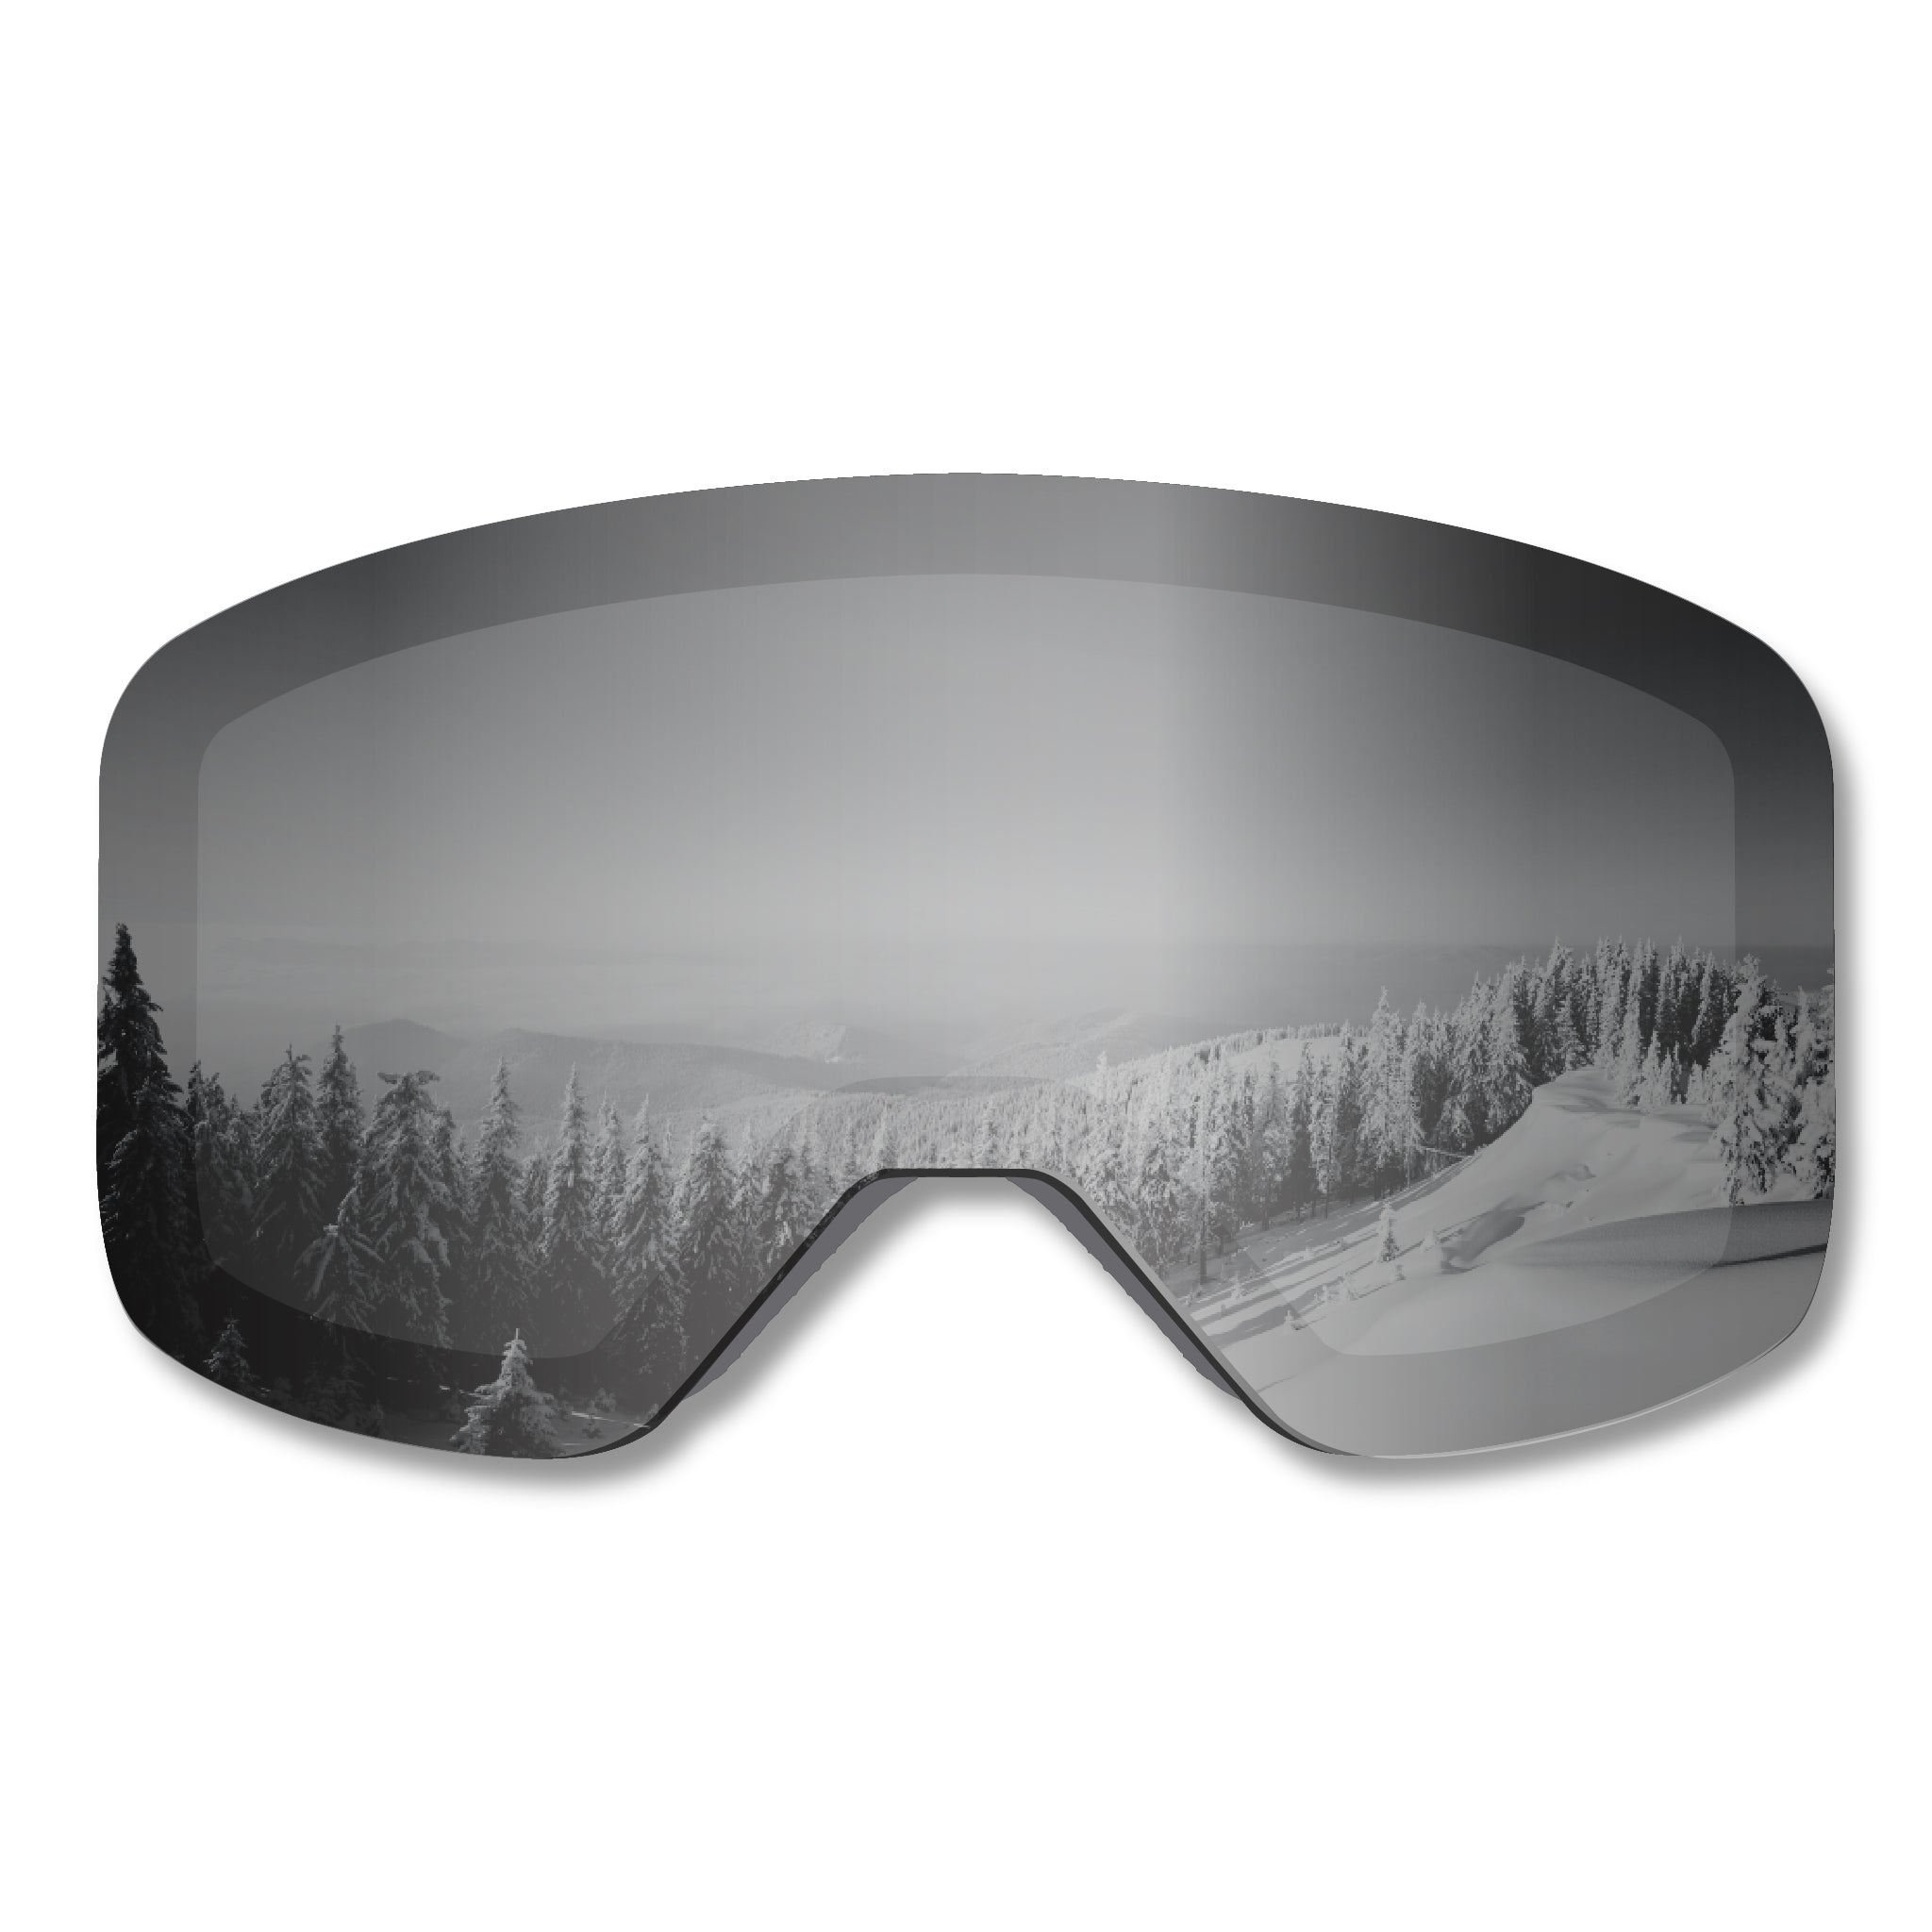 Product shot of the STAGE Propnetic Mirror Chrome lens for the STAGE Propnetic Magnetic Ski Goggle.